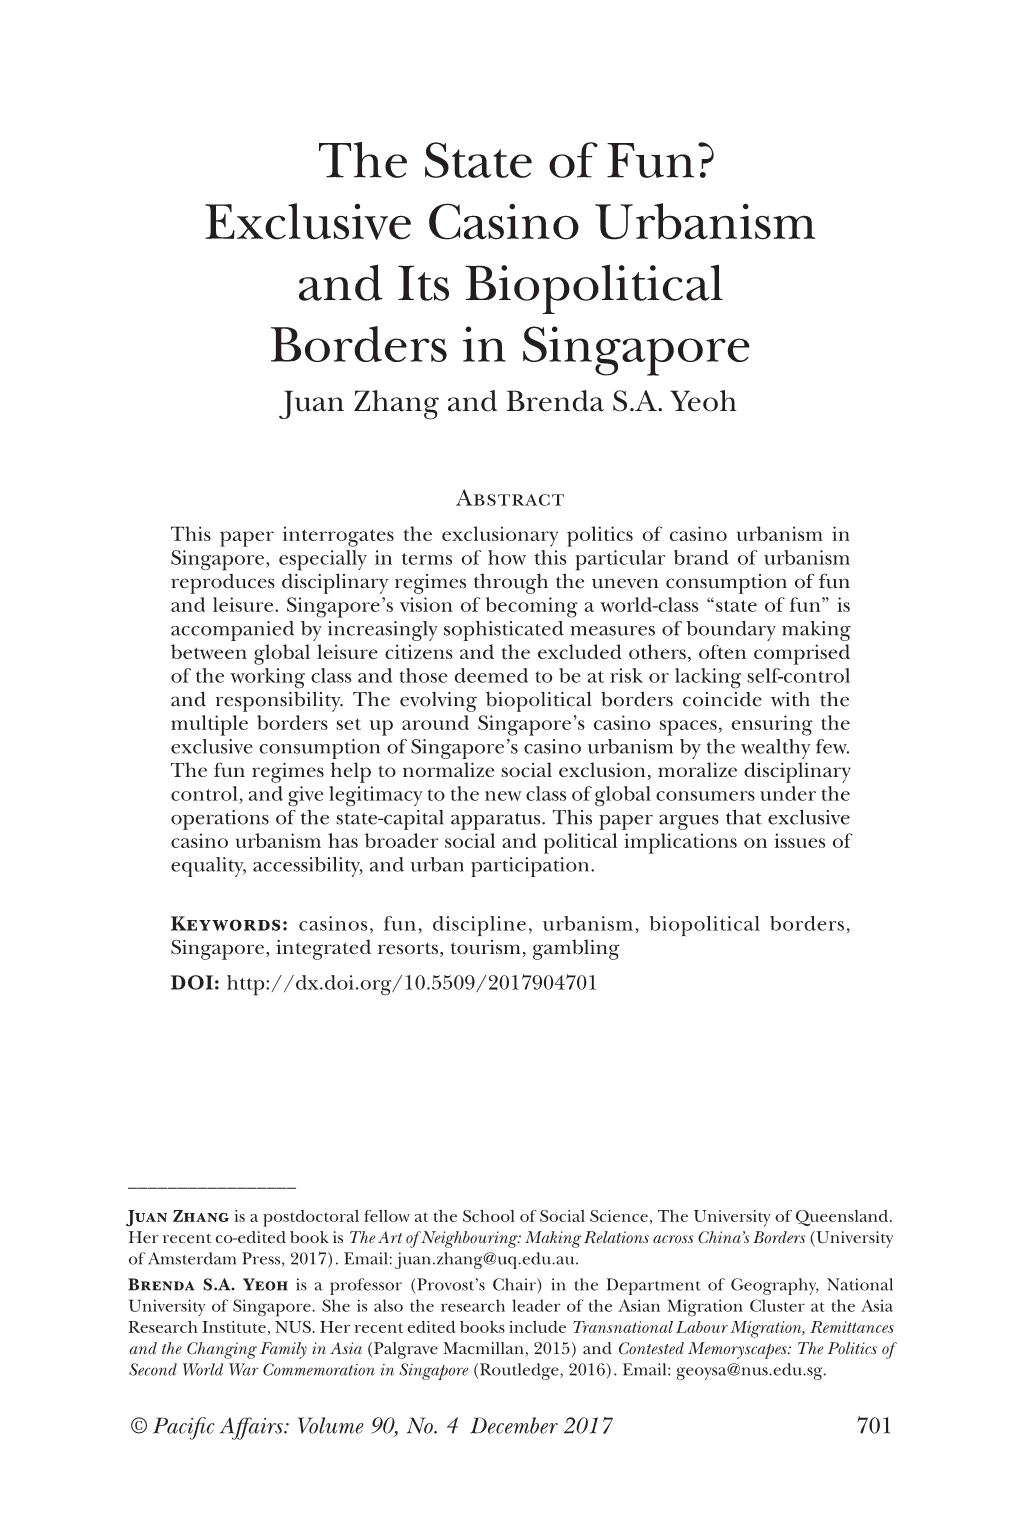 Exclusive Casino Urbanism and Its Biopolitical Borders in Singapore Juan Zhang and Brenda S.A